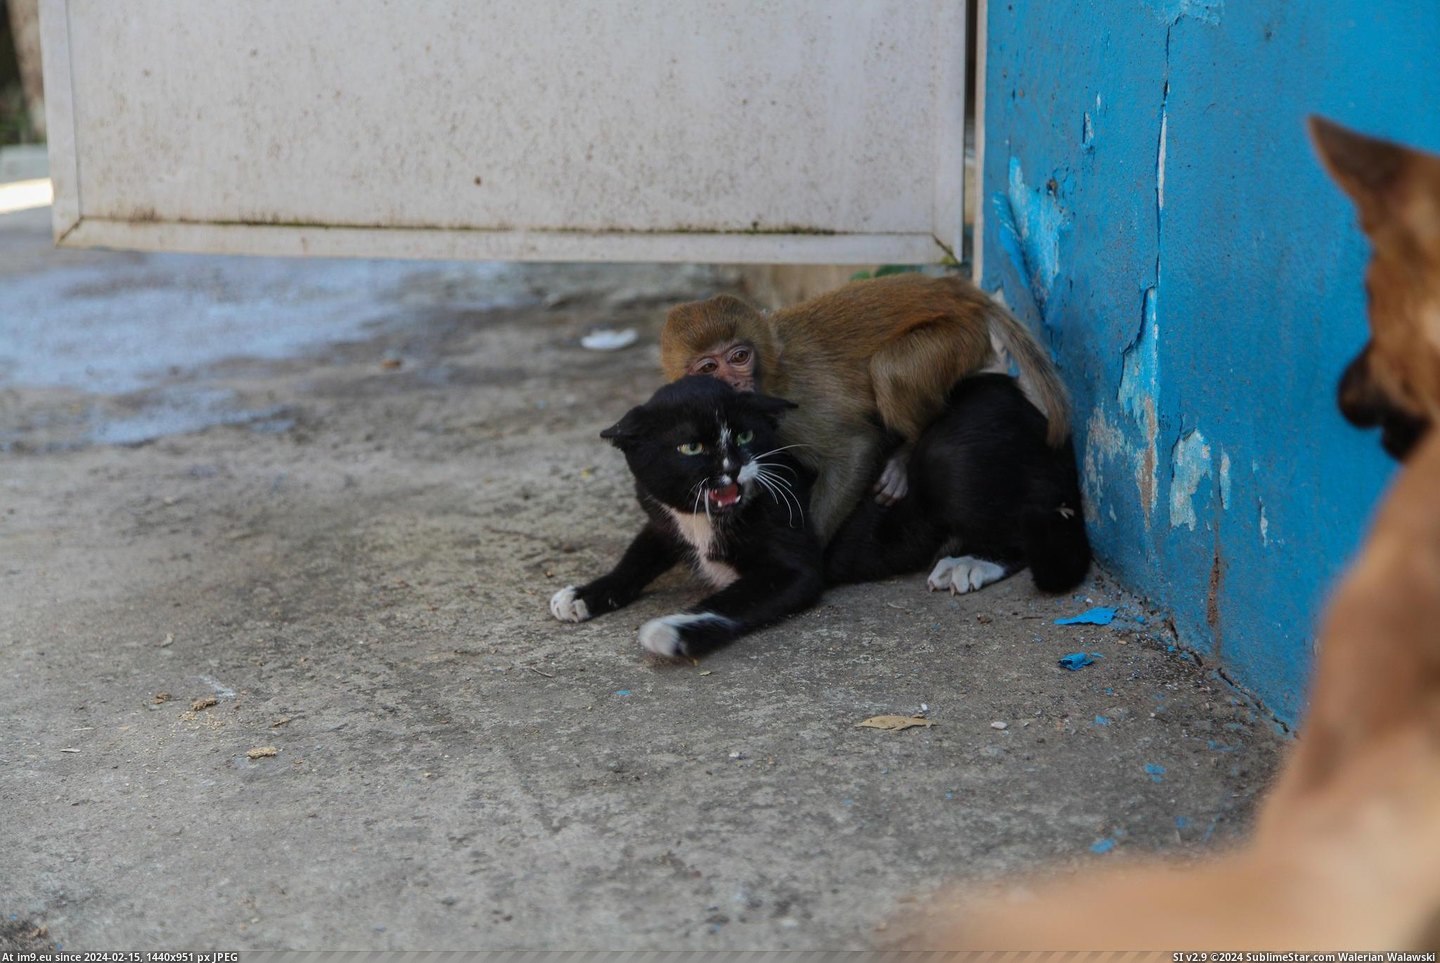 #Cat #Monkey #Protecting #Dog [Aww] Cat protecting a little monkey from a dog Pic. (Image of album My r/AWW favs))